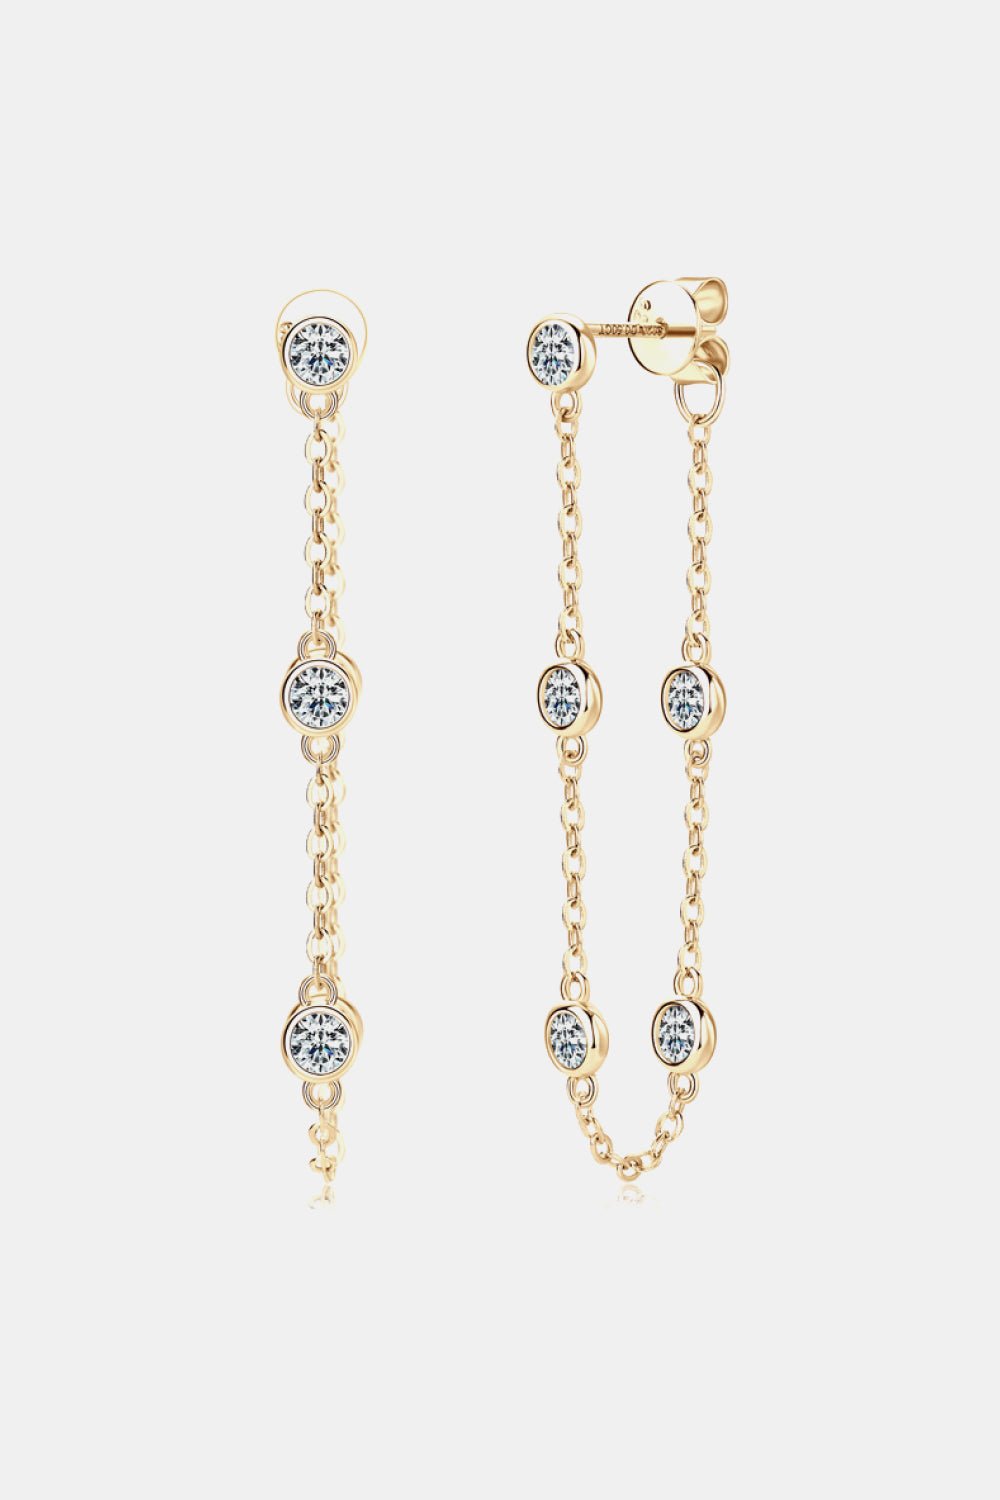 1 Carat Moissanite 925 Sterling Silver Chain Earrings - London's Closet Boutique